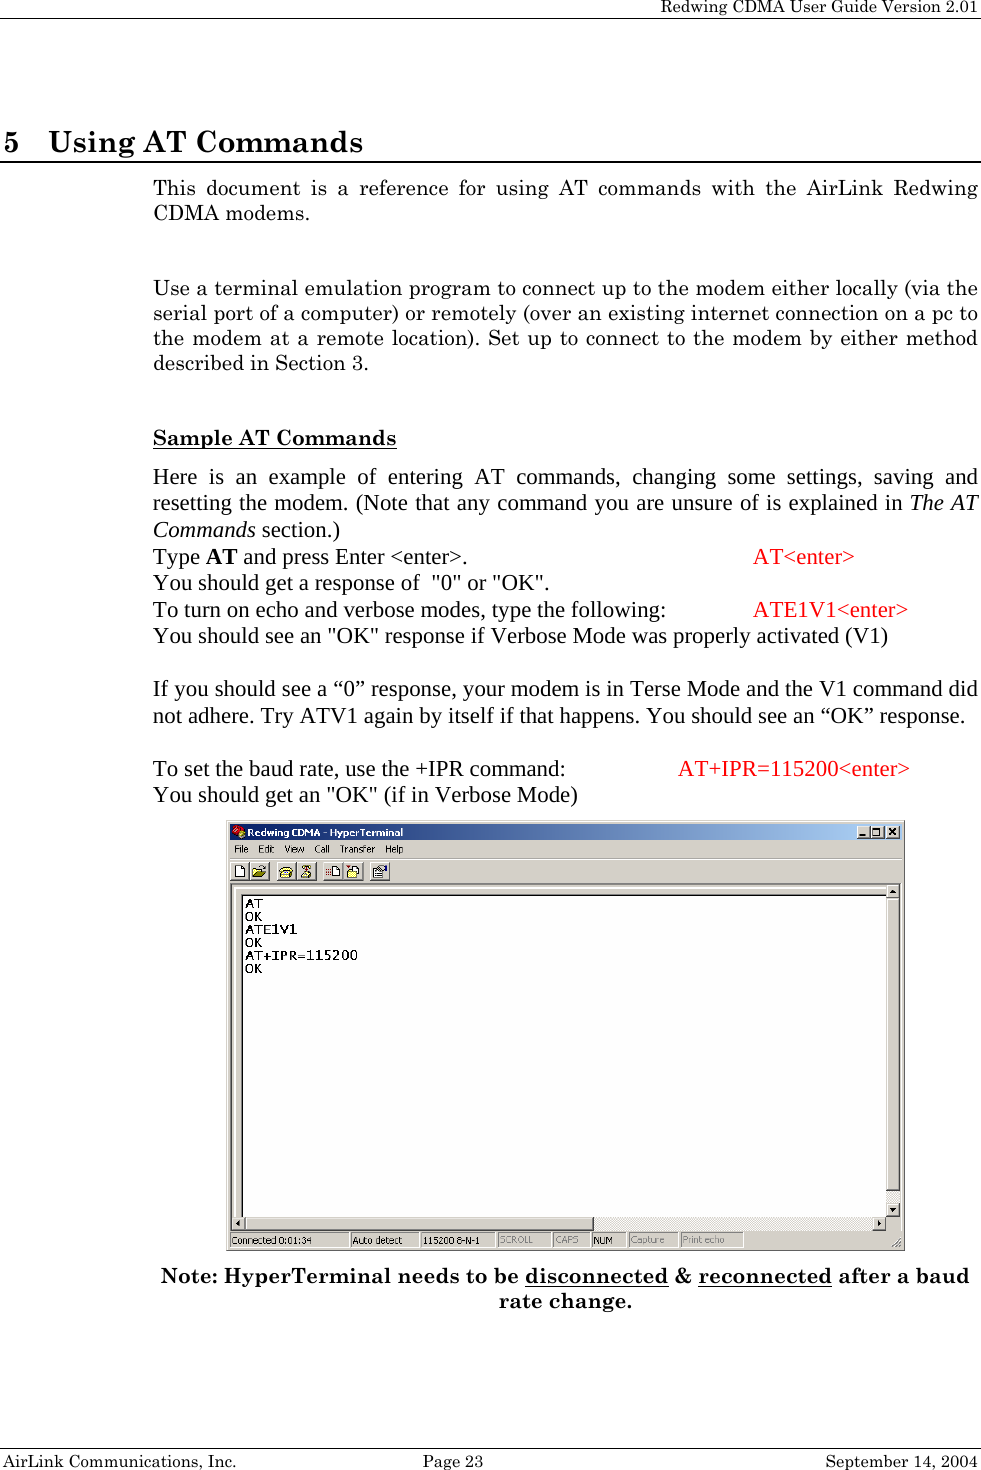   Redwing CDMA User Guide Version 2.01   AirLink Communications, Inc.  Page 23  September 14, 2004 5 Using AT Commands This document is a reference for using AT commands with the AirLink Redwing CDMA modems.   Use a terminal emulation program to connect up to the modem either locally (via the serial port of a computer) or remotely (over an existing internet connection on a pc to the modem at a remote location). Set up to connect to the modem by either method described in Section 3.  Sample AT Commands  Here is an example of entering AT commands, changing some settings, saving and resetting the modem. (Note that any command you are unsure of is explained in The AT Commands section.) Type AT and press Enter &lt;enter&gt;.         AT&lt;enter&gt; You should get a response of  &quot;0&quot; or &quot;OK&quot;. To turn on echo and verbose modes, type the following:     ATE1V1&lt;enter&gt; You should see an &quot;OK&quot; response if Verbose Mode was properly activated (V1)  If you should see a “0” response, your modem is in Terse Mode and the V1 command did not adhere. Try ATV1 again by itself if that happens. You should see an “OK” response.  To set the baud rate, use the +IPR command:    AT+IPR=115200&lt;enter&gt; You should get an &quot;OK&quot; (if in Verbose Mode)  Note: HyperTerminal needs to be disconnected &amp; reconnected after a baud rate change. 